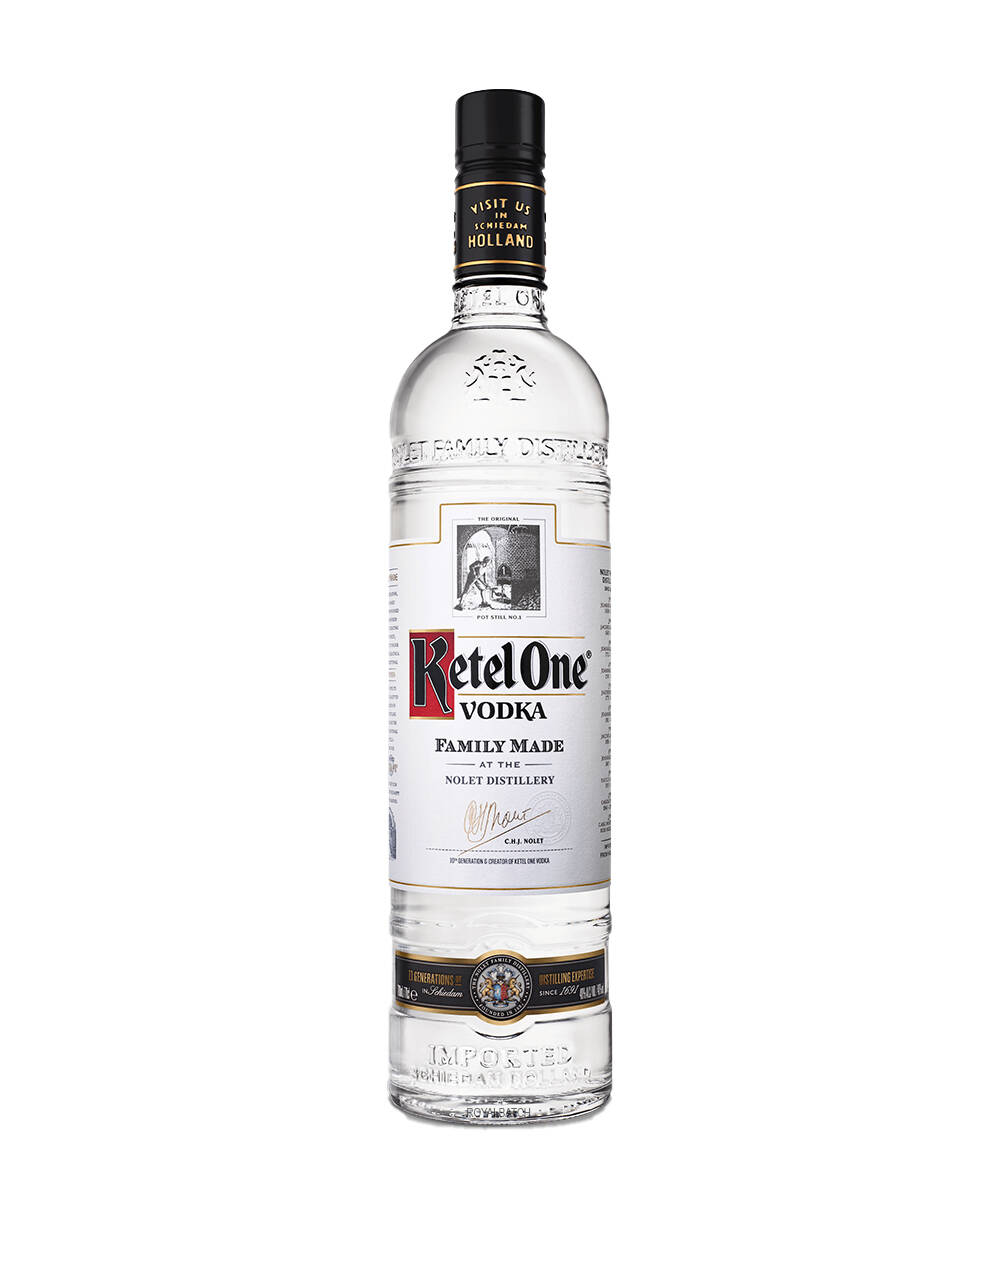 Ketel One Family Made at the Nolet Distillery Vodka 1L